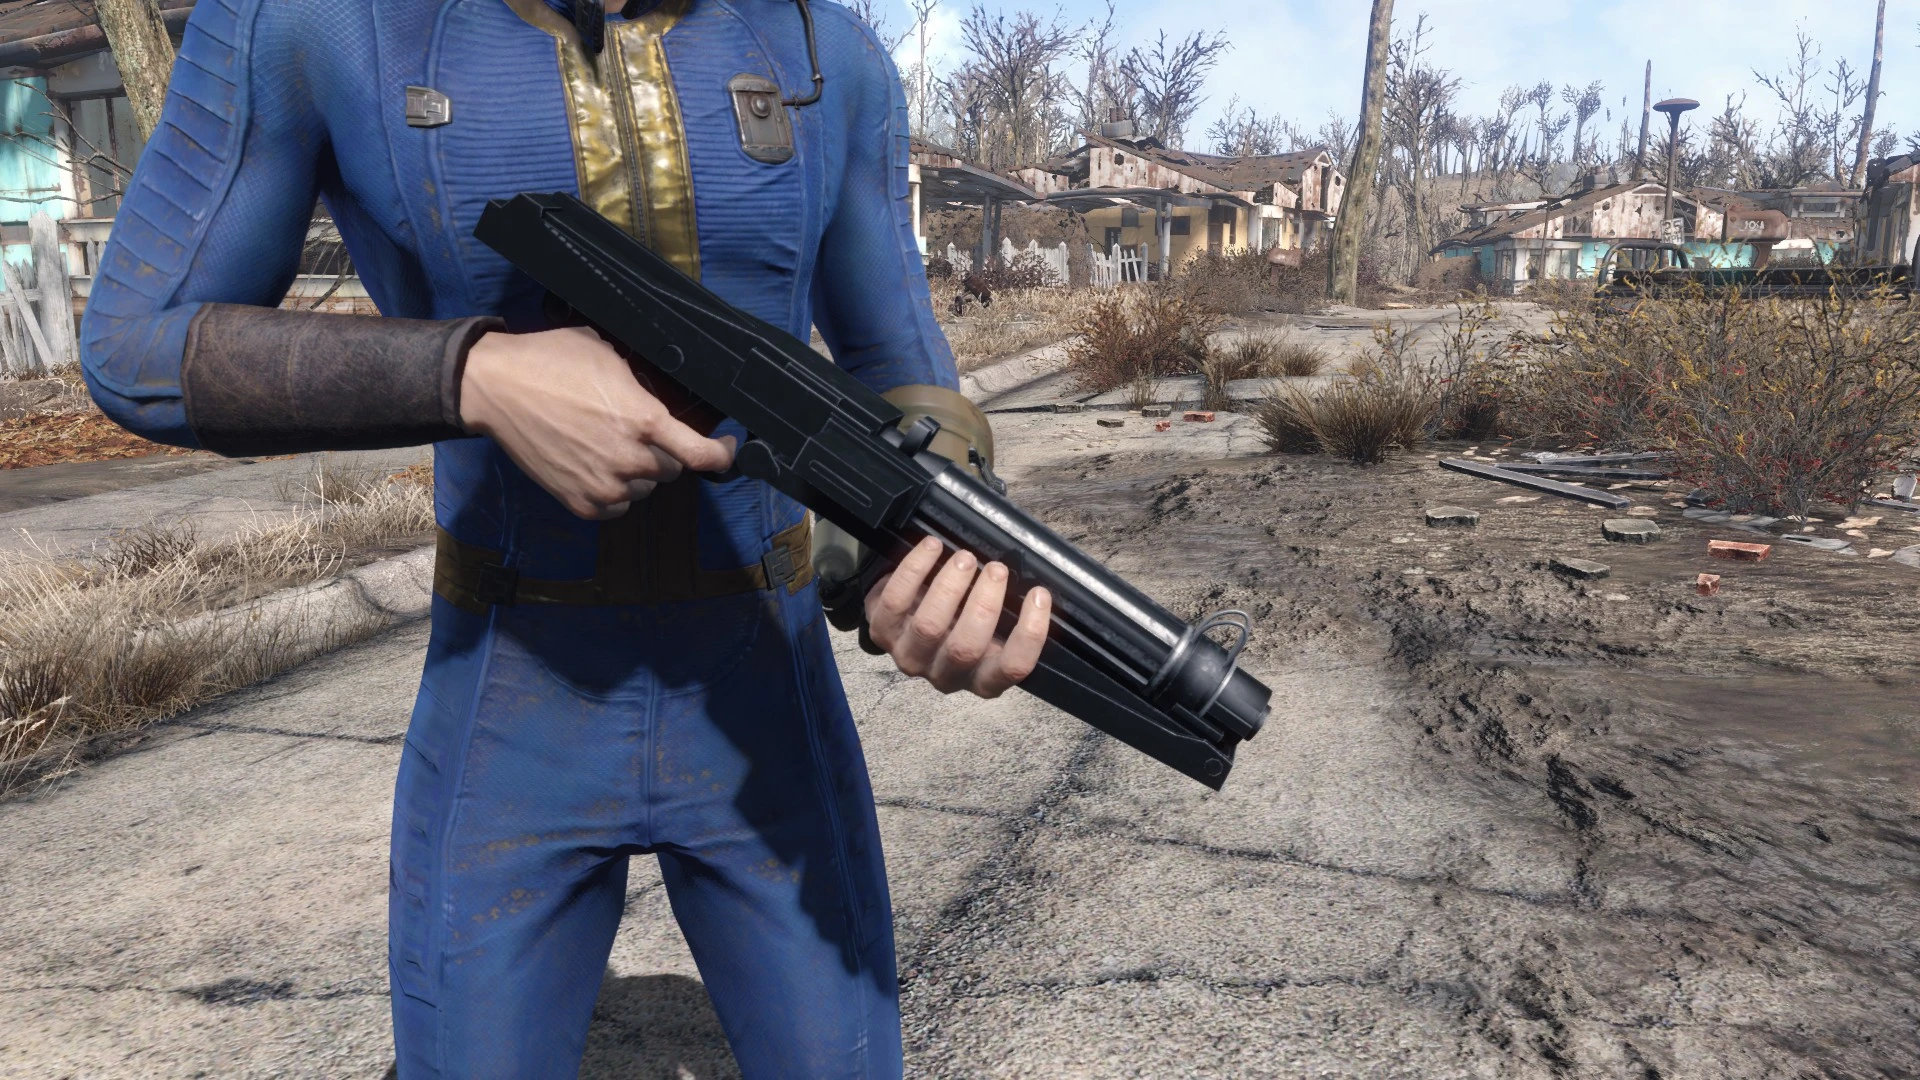 fallout 4 star wars weapon mods